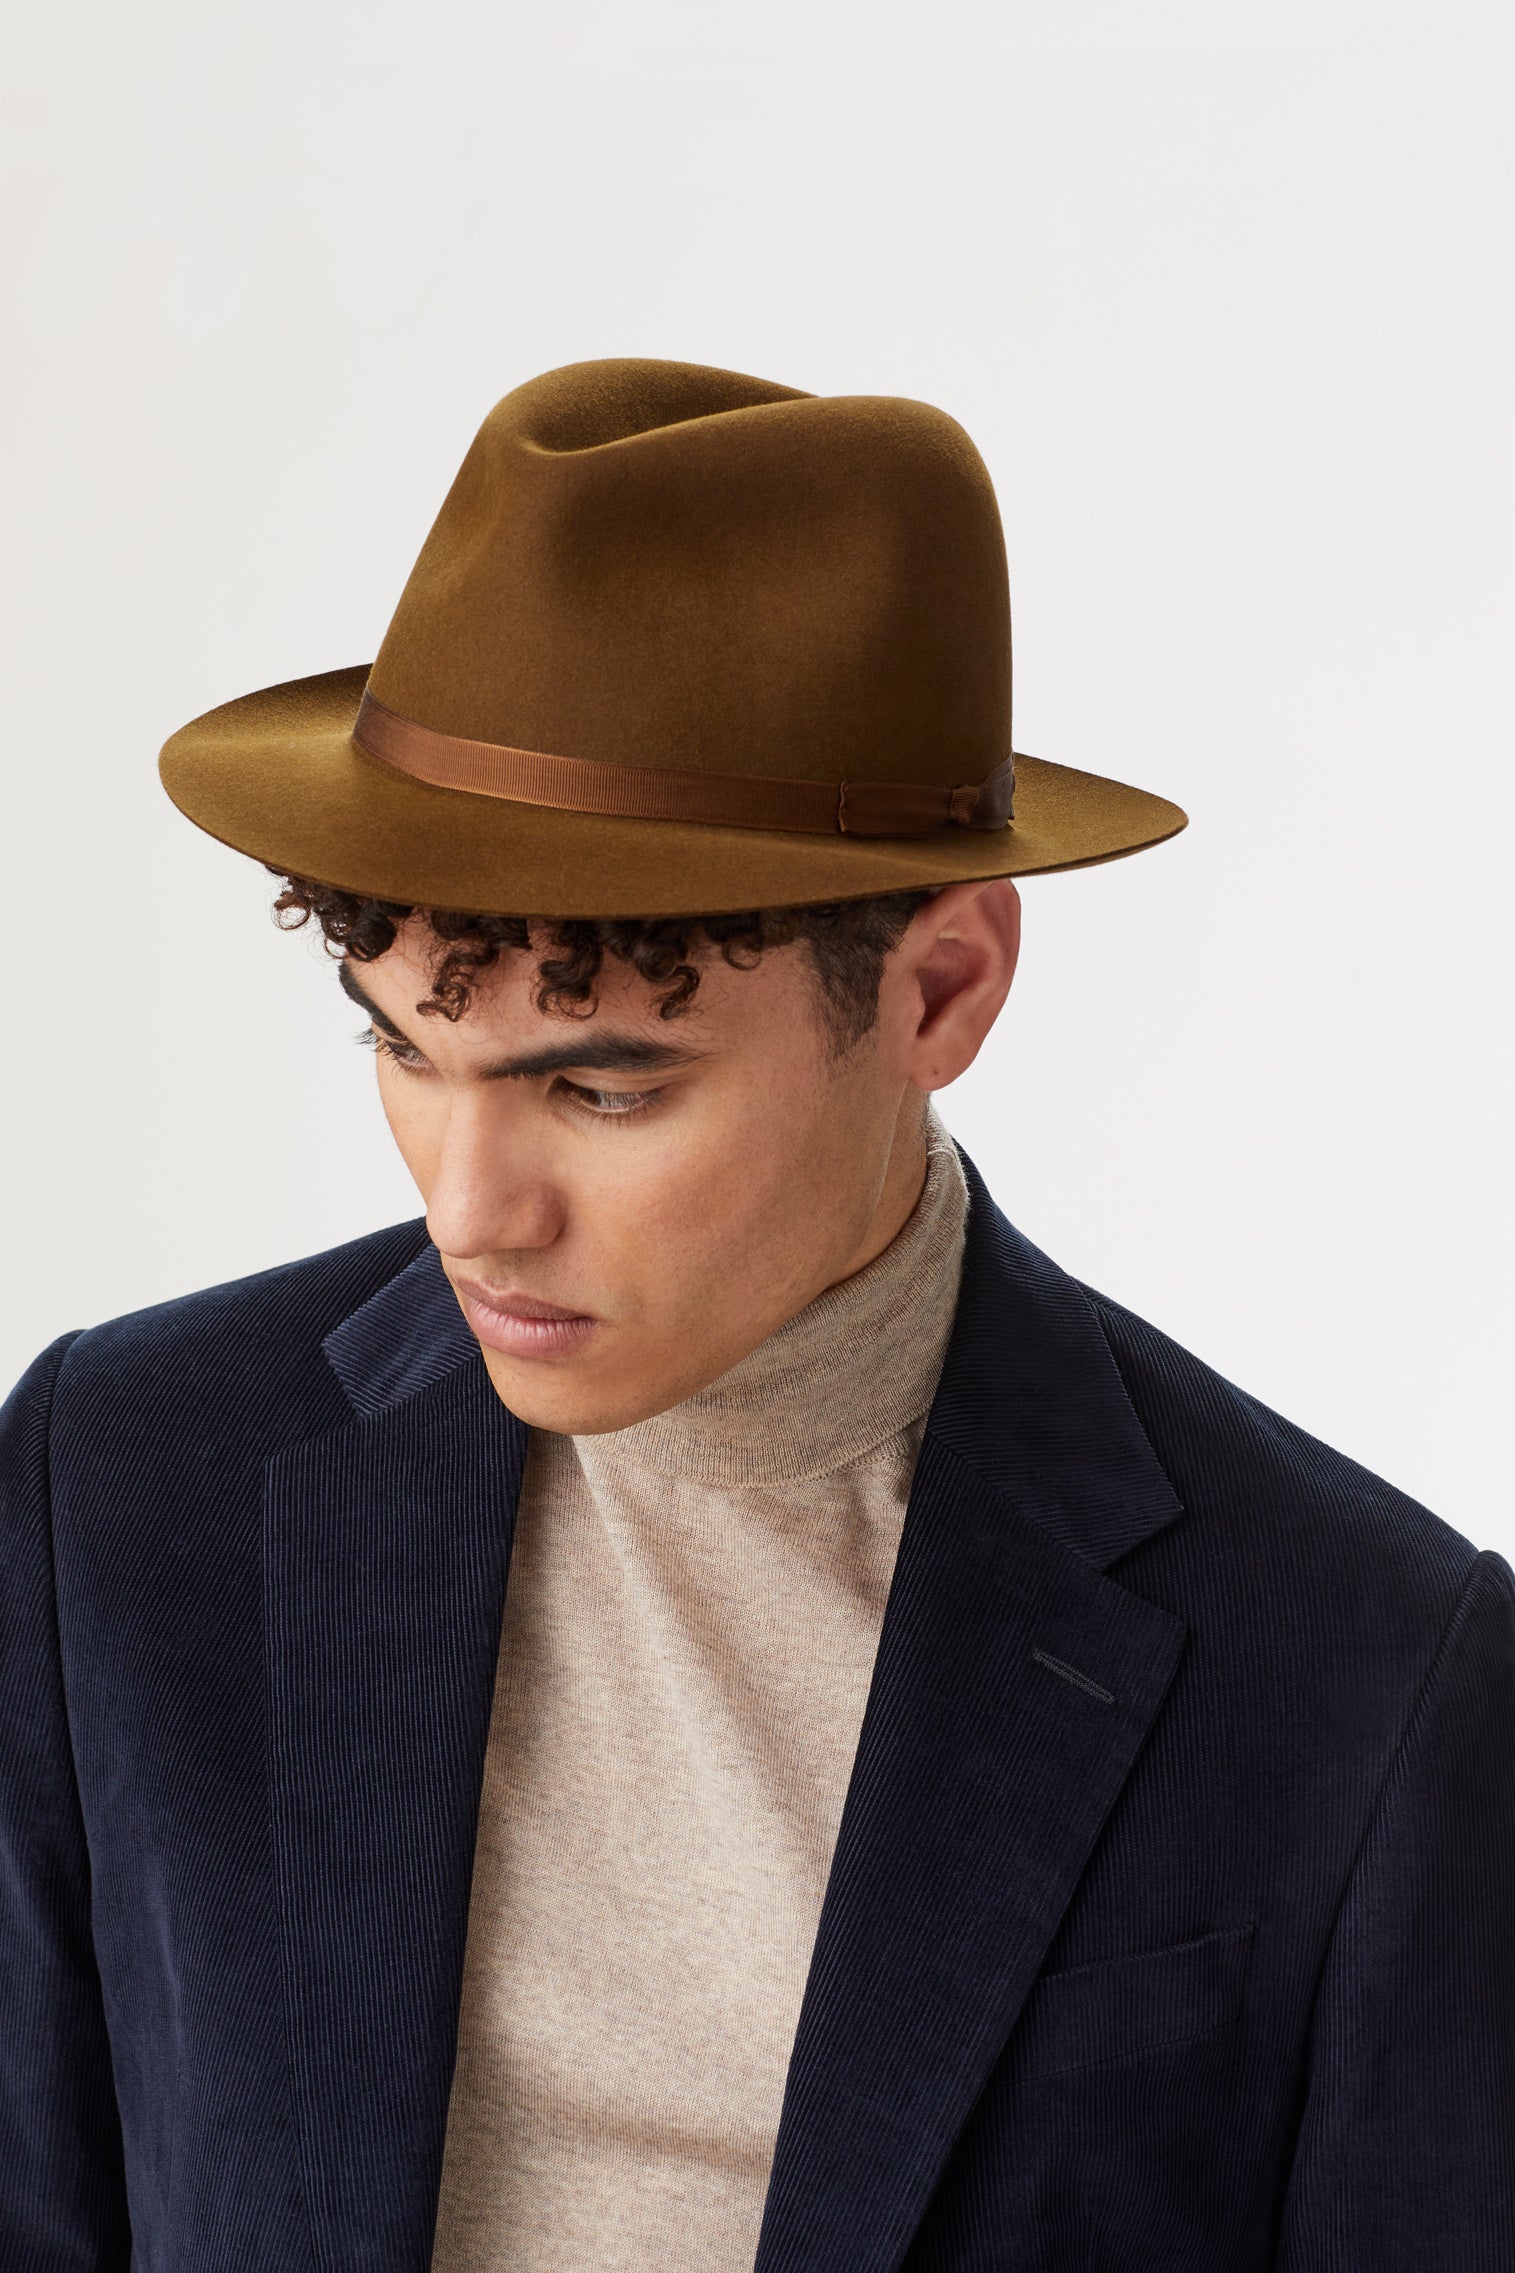 Voyager Rollable Trilby - Men's Hats - Lock & Co. Hatters London UK